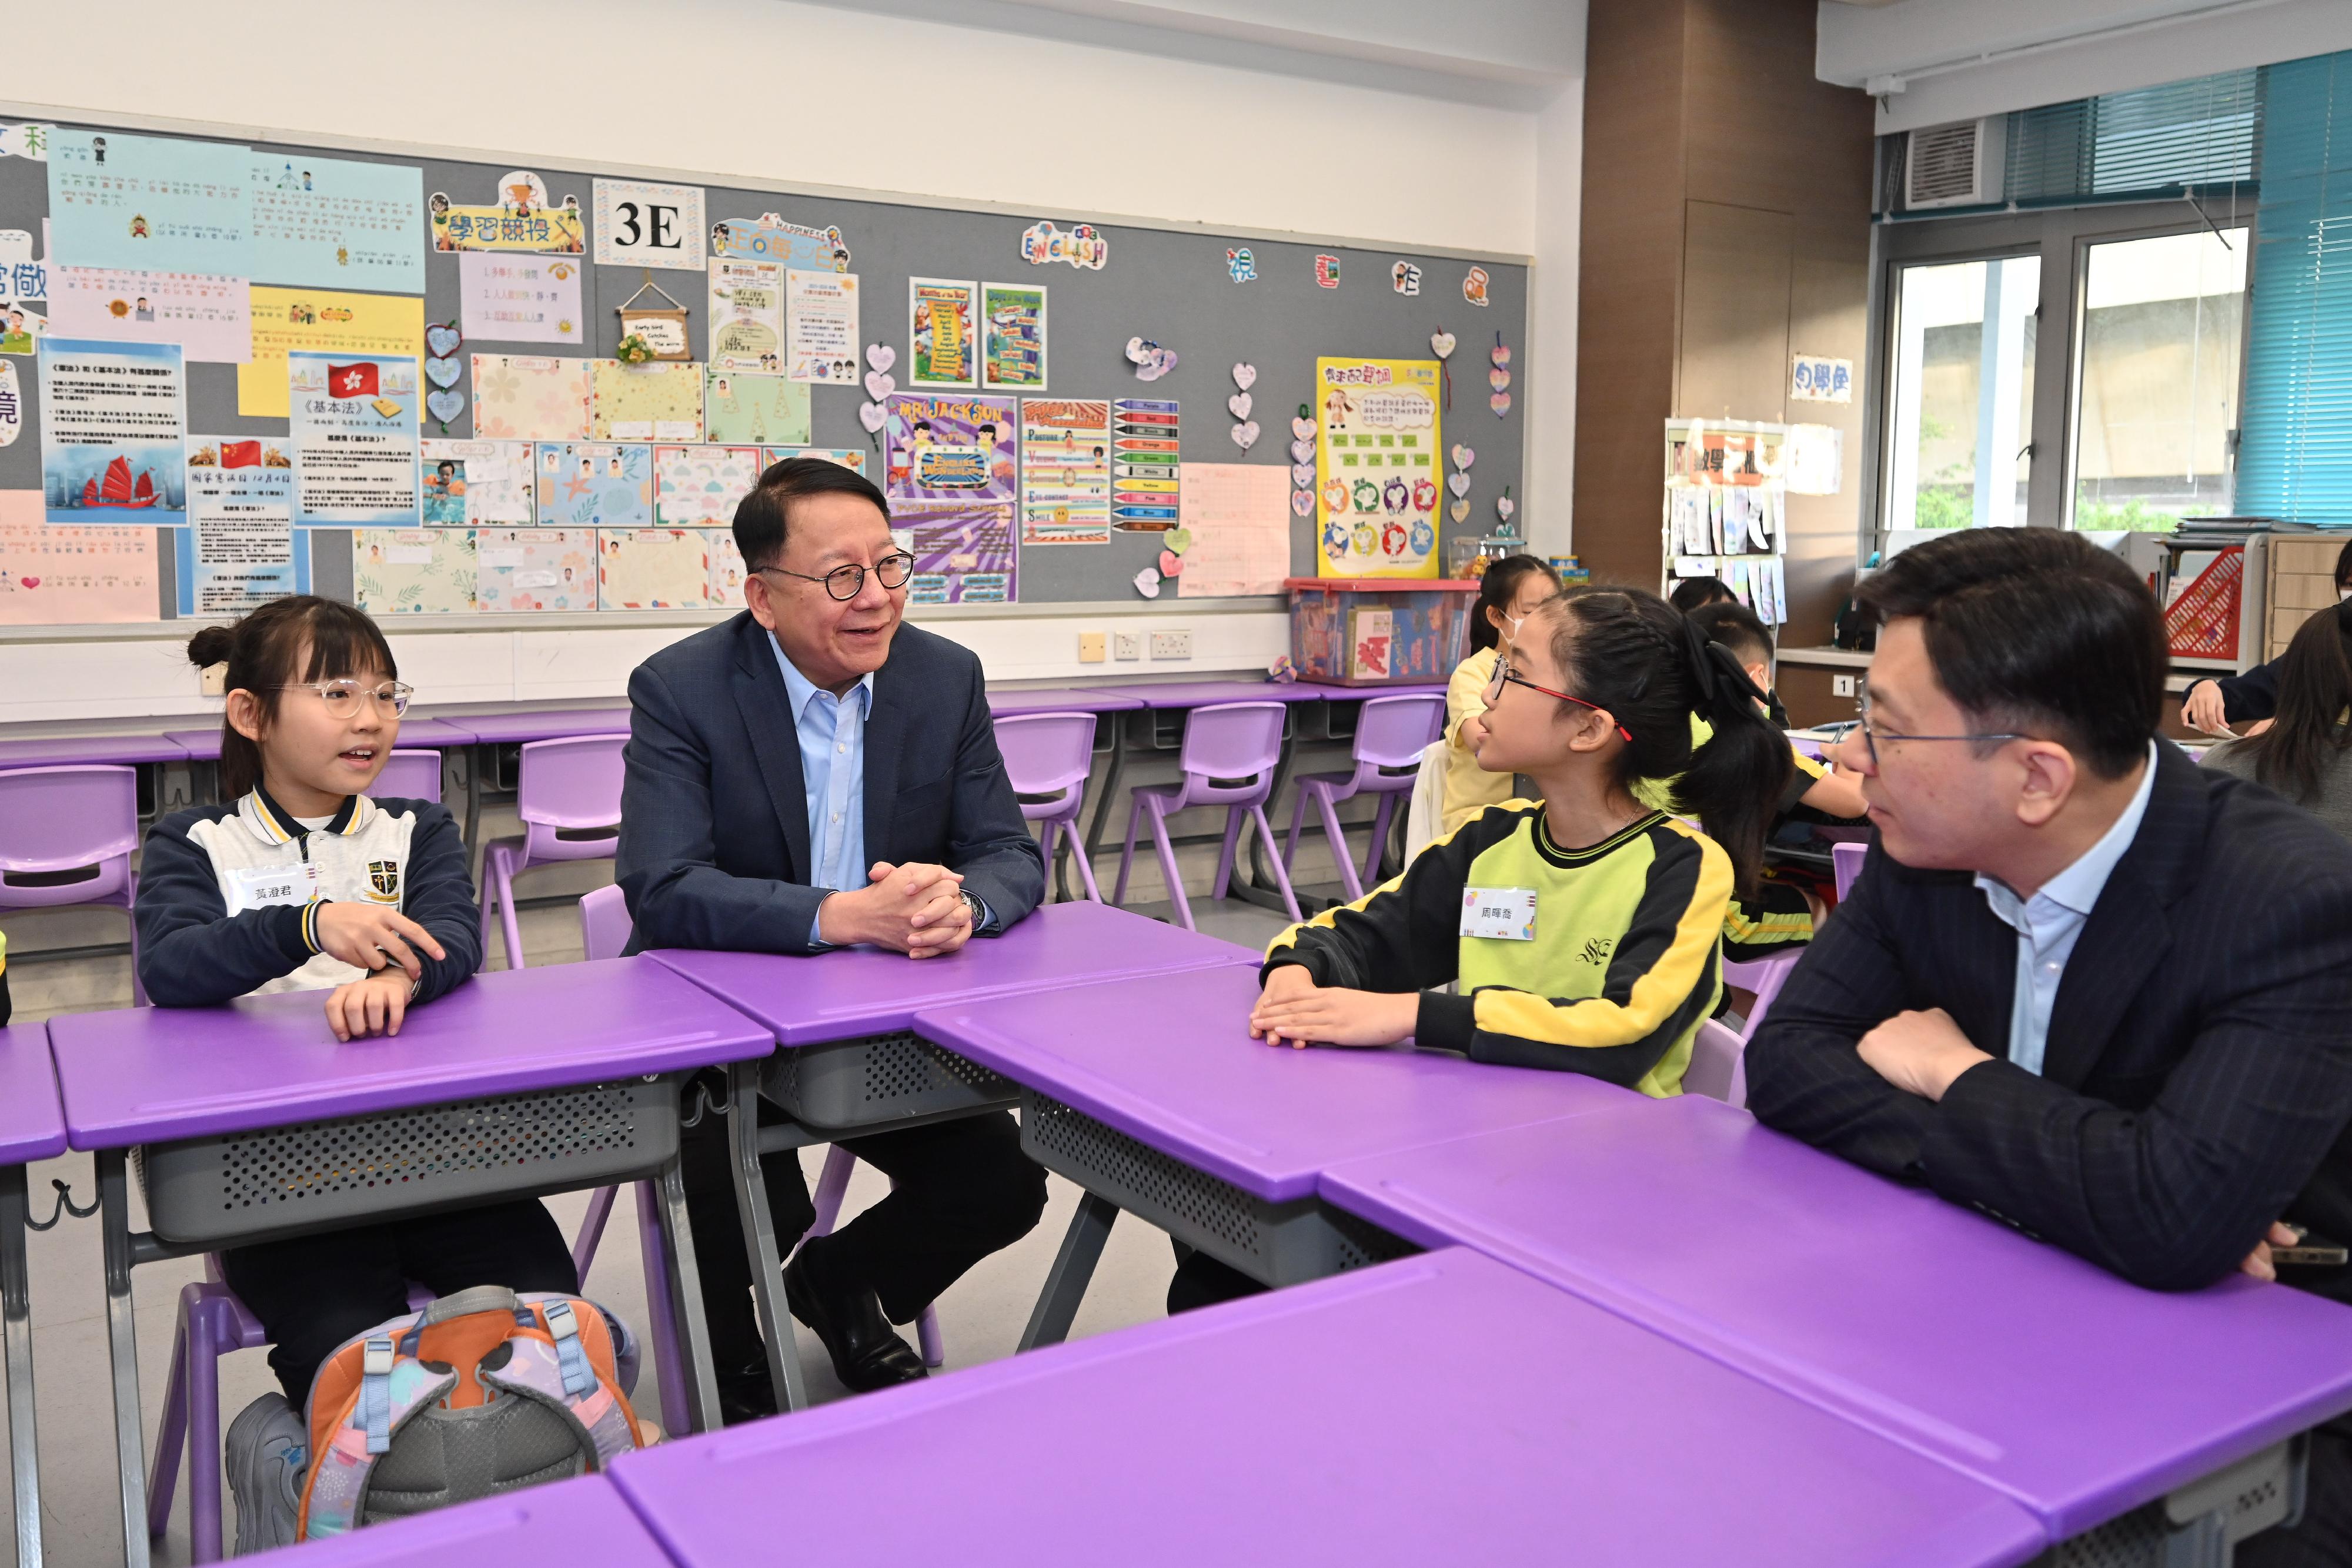 The Chief Secretary for Administration, Mr Chan Kwok-ki, today (December 7) visited SKH St Andrew's Primary School in Sham Shui Po to learn more about the implementation of the School-based After School Care Service Scheme. The Secretary for Labour and Welfare, Mr Chris Sun, and the Acting Secretary for Education, Mr Sze Chun-fai, also joined the visit. Photo shows Mr Chan (second left) and Mr Sun (first right) listening to students sharing how they do homework and revisions in the classroom at school.